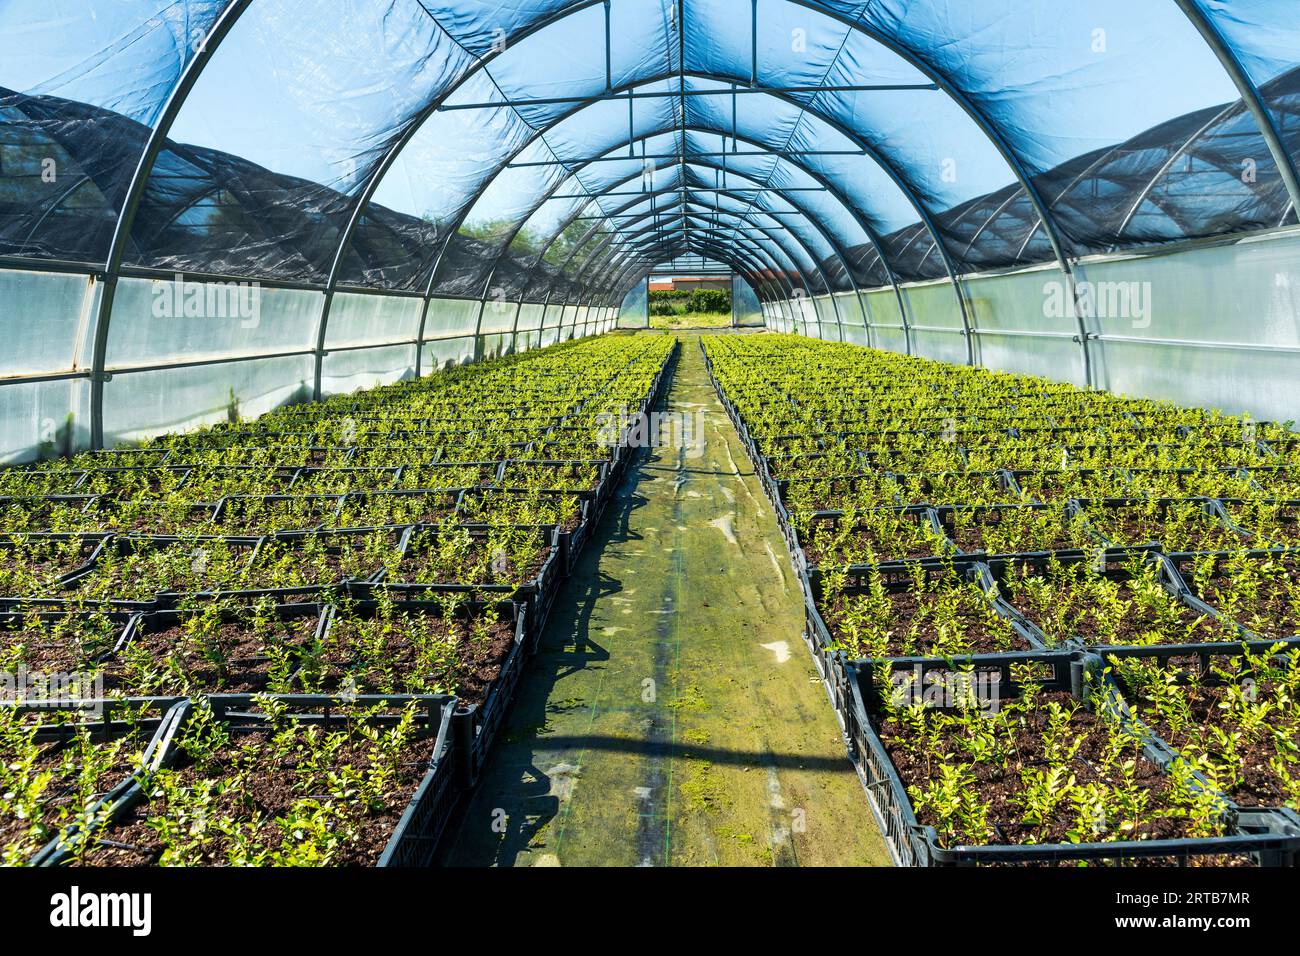 Perspective view of rows of verdant plants growing on soil in hothouse on sunny day Stock Photo